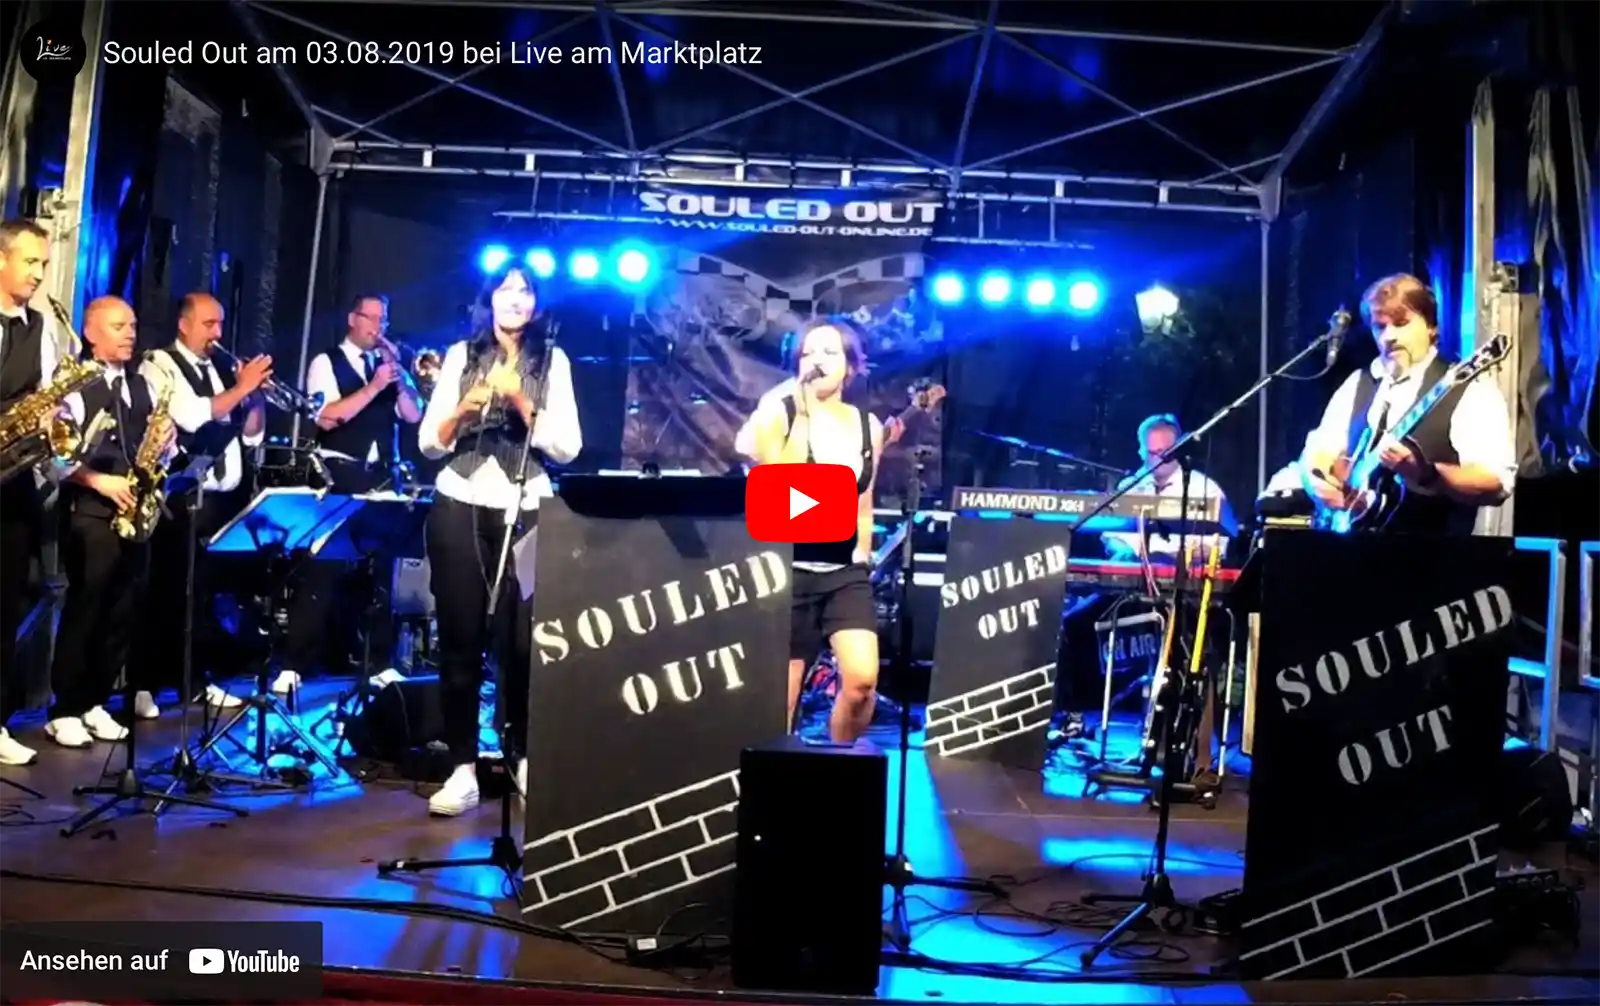 Souled Out auf Youtube anschauen